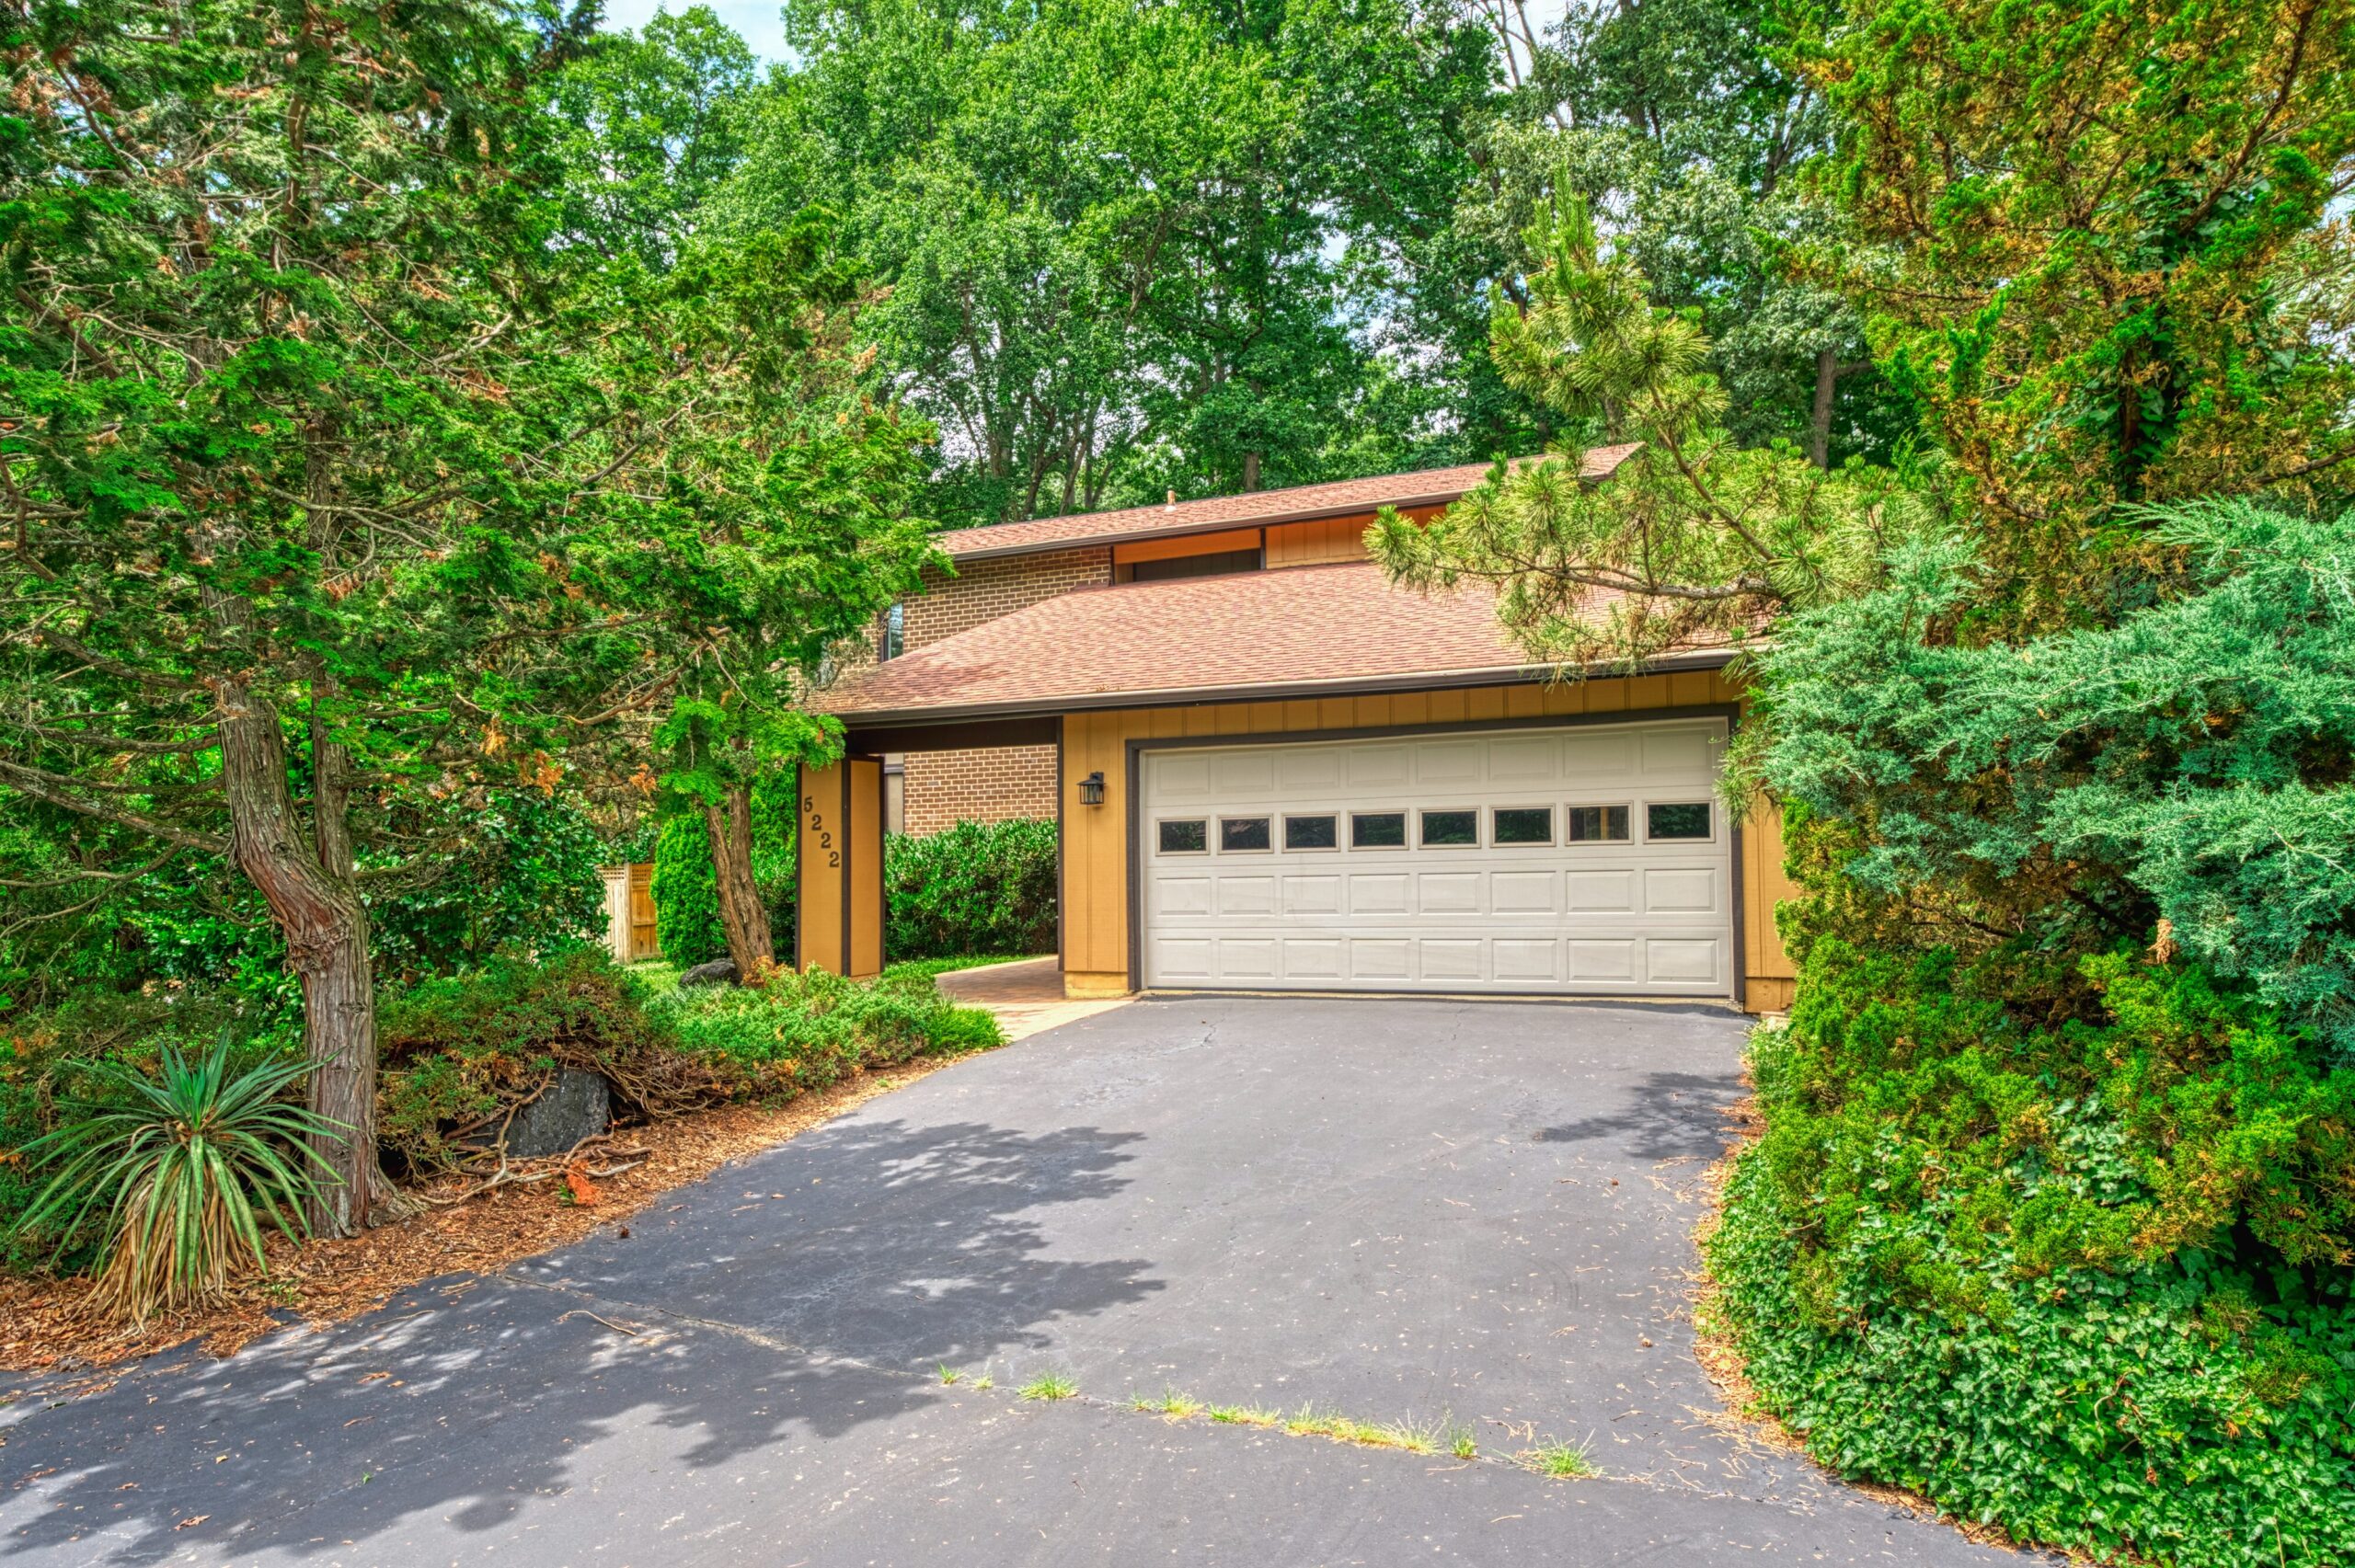 Professional exterior photo of 5222 Bradfield Drive in Burke, Virginia - showing the street view with mature trees that surround the contemporary home. The 2-car garage is visible along with the entrance to the covered walkway to the entrance